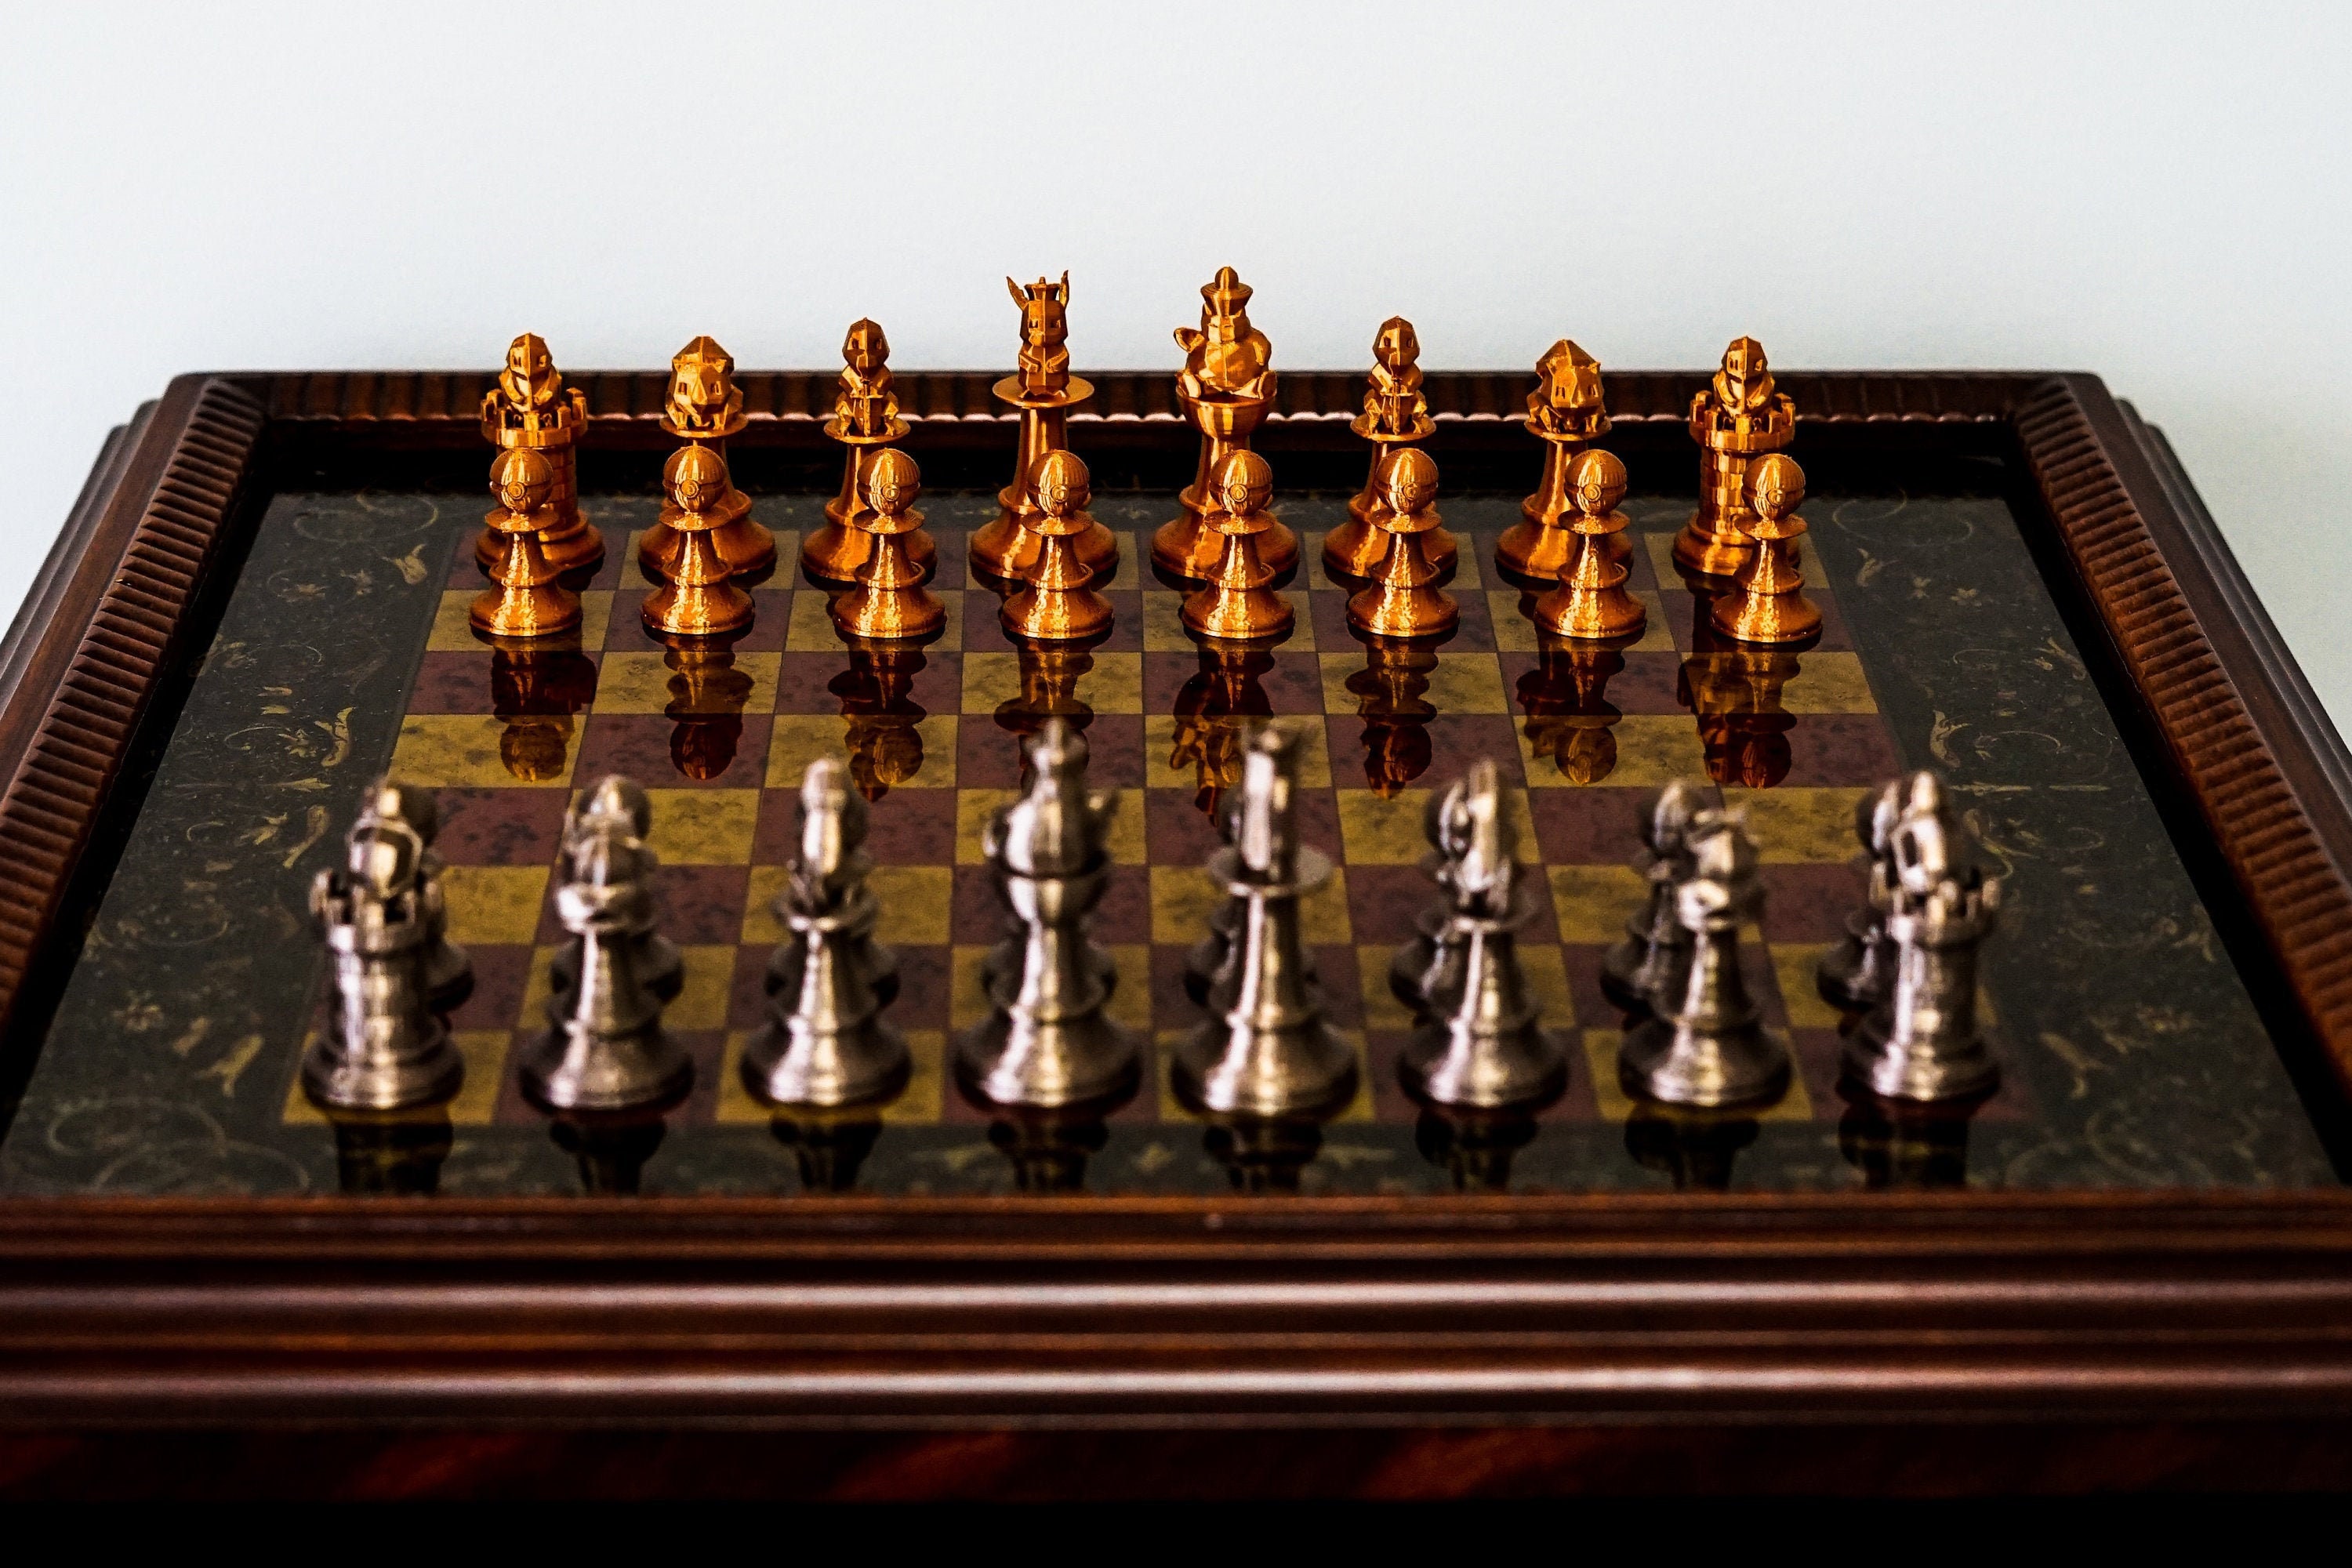 FateZero Anime Inspires Chess Pieces from Megahouse  Interest  Anime  News Network